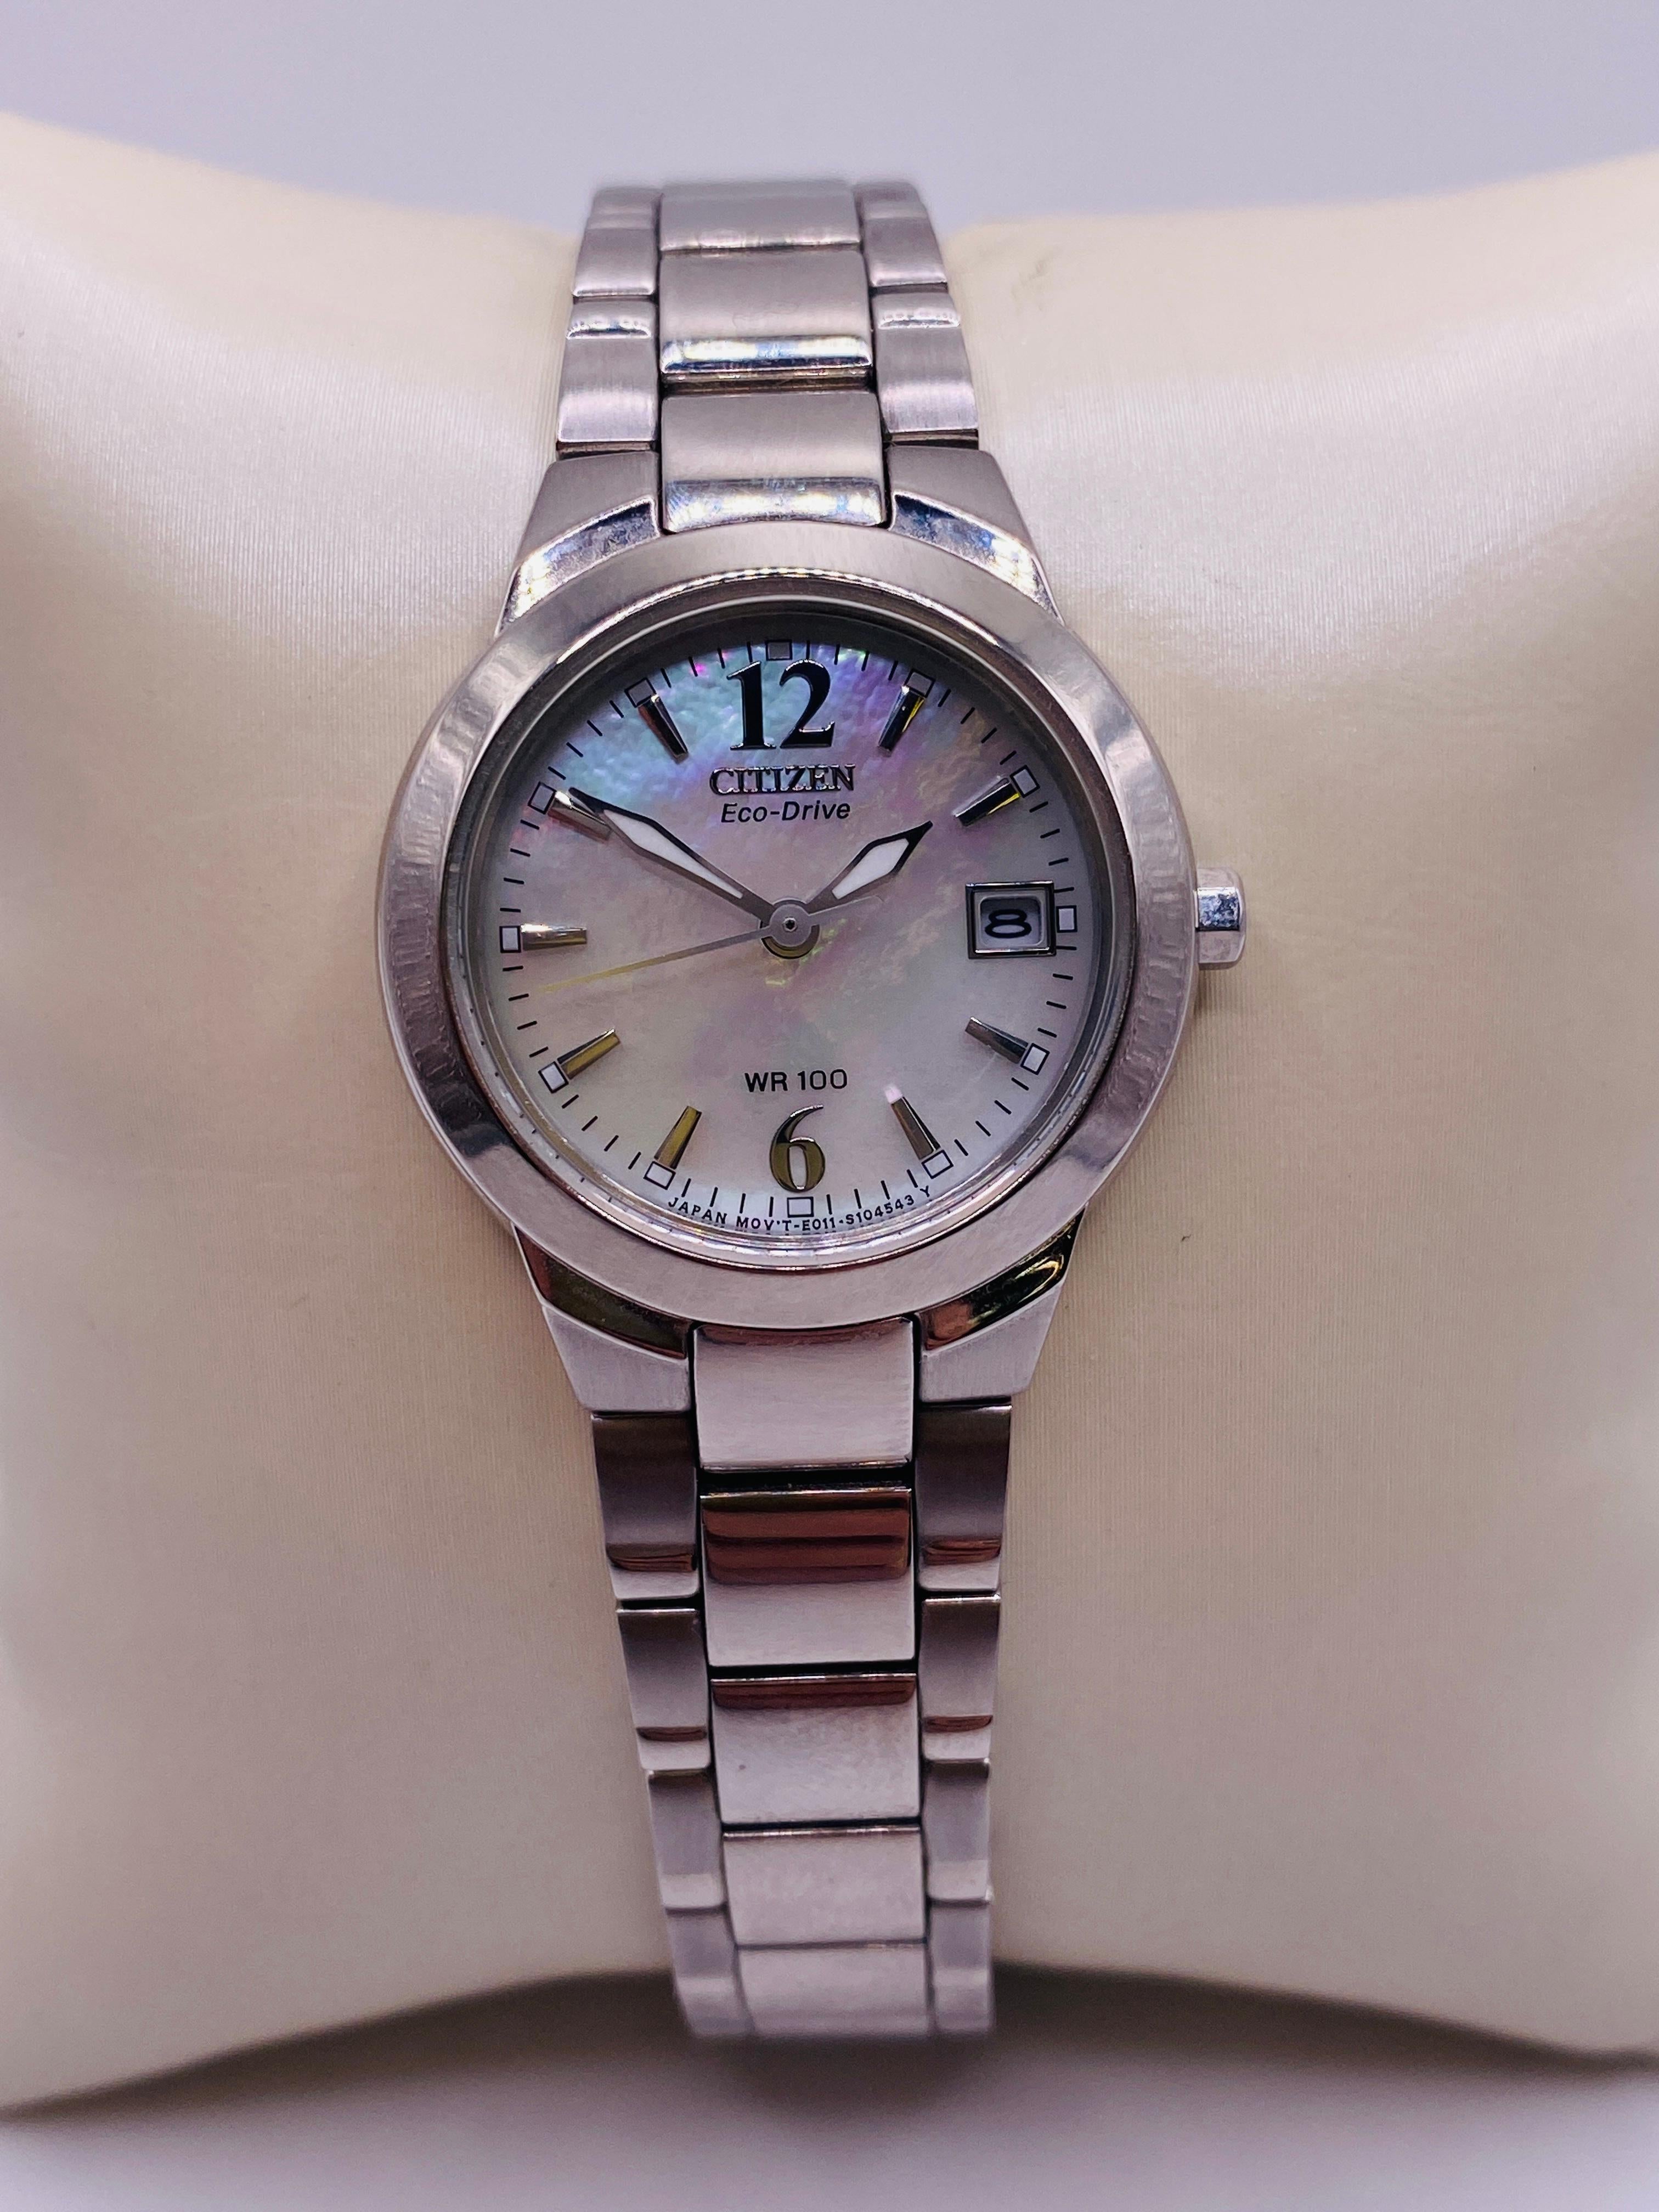 Citizen Eco-Drive WR100 Chandelier Ladies Watch with Stainless Steel Band, 26mm case, Mother of Pearl dial and fold over clasp with push button. Japanese movement. Model E011-S070074. Serial 461030723